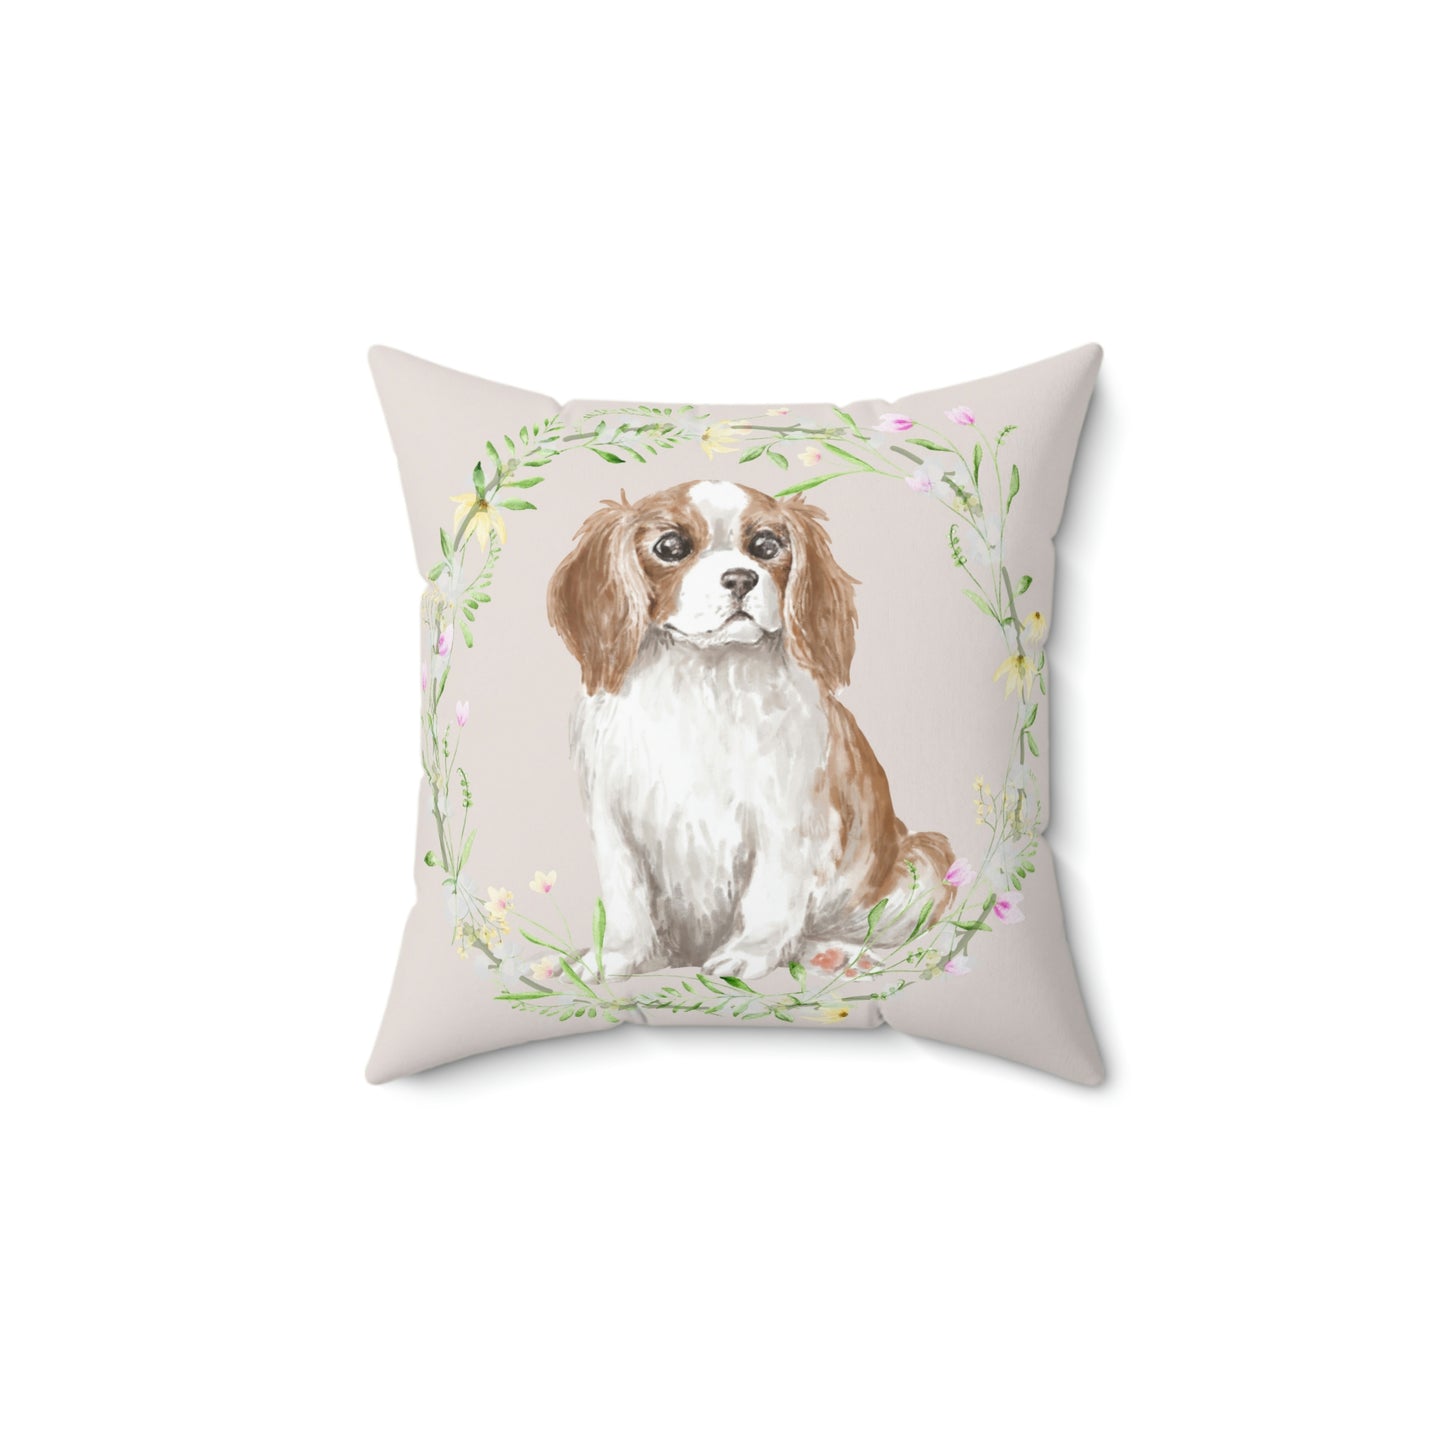 Cavalier dog/Spaniel Dog with Floral Wreath design Spun Polyester Square Indoor Pillow